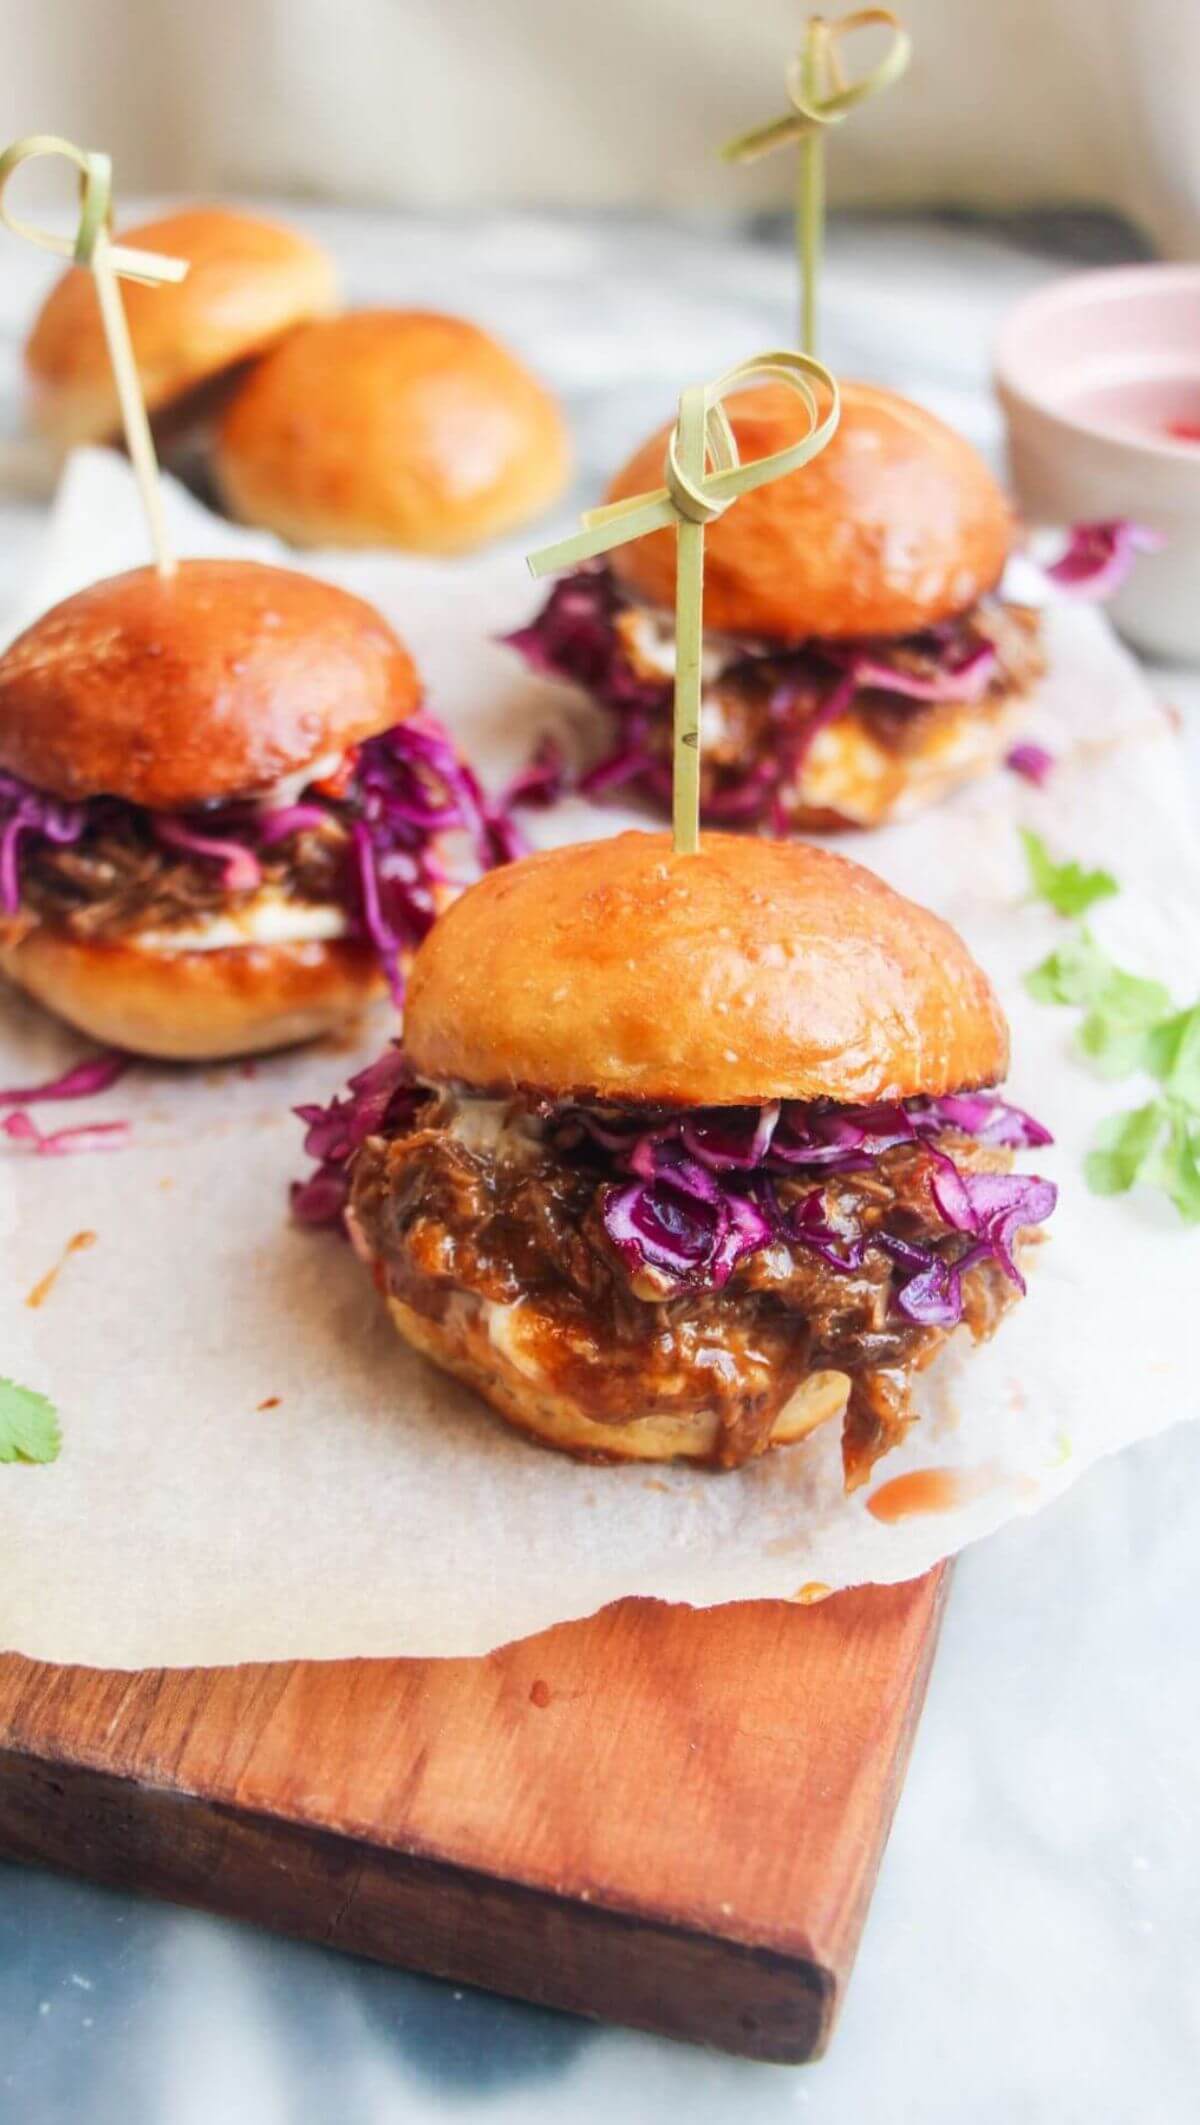 3 pulled pork sliders on a small wooden board.